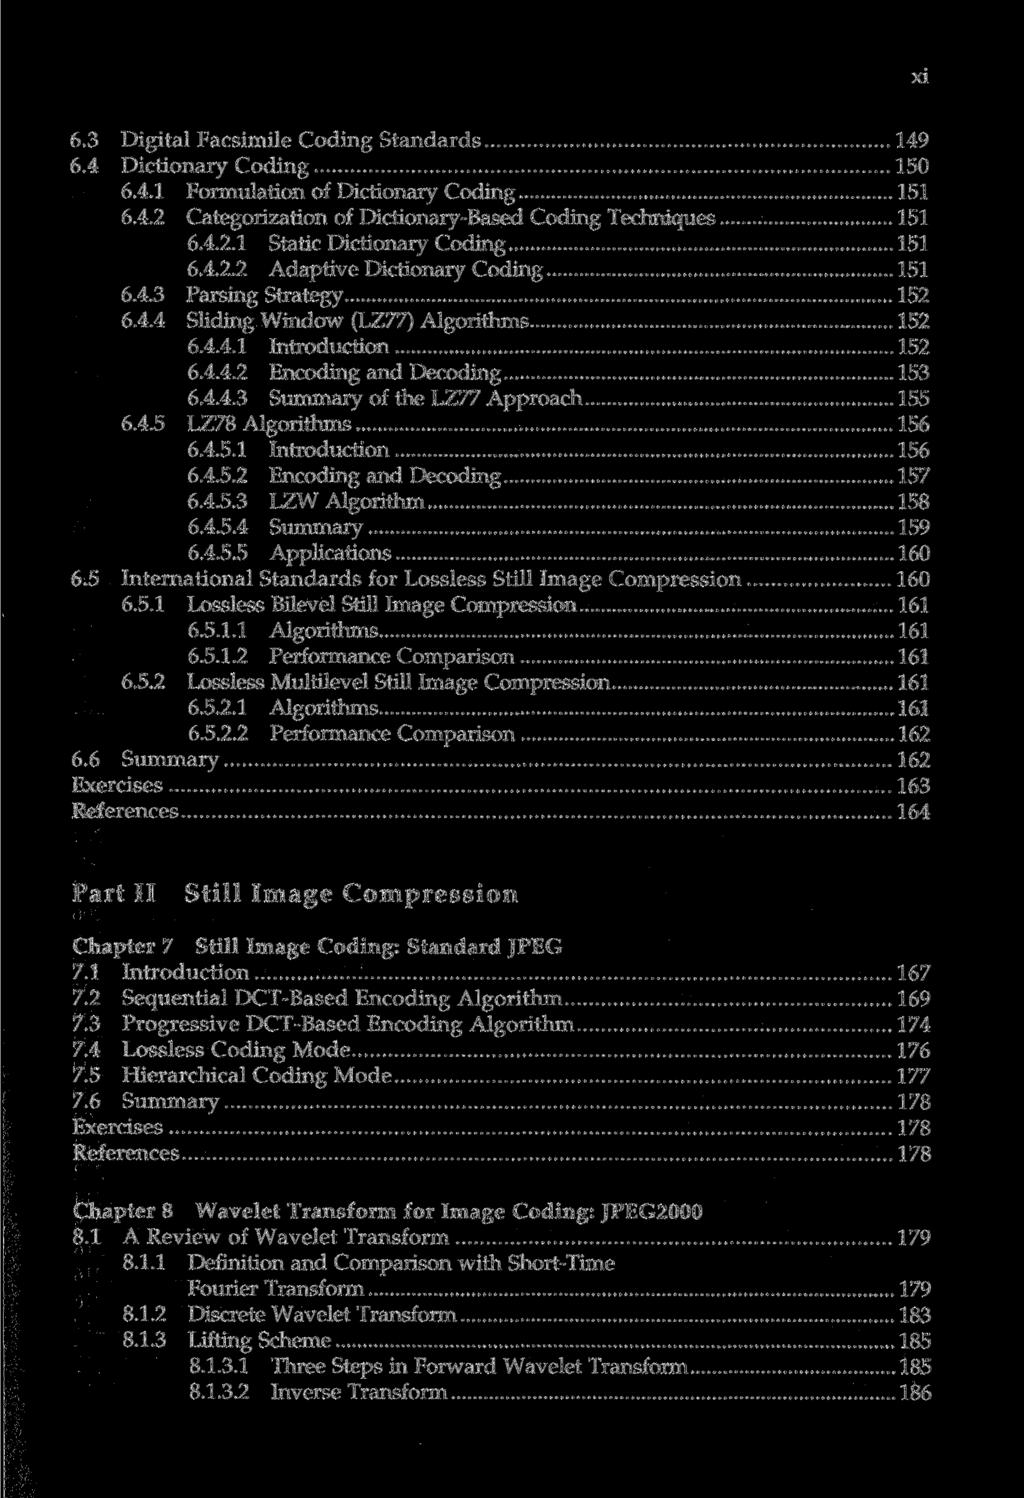 xi 6.3 Digital Facsimile Coding Standards 149 6.4 Dictionary Coding 150 6.4.1 Formulation of Dictionary Coding 151 6.4.2 Categorization of Dictionary-Based Coding Techniques 151 6.4.2.1 Static Dictionary Coding 151 6.